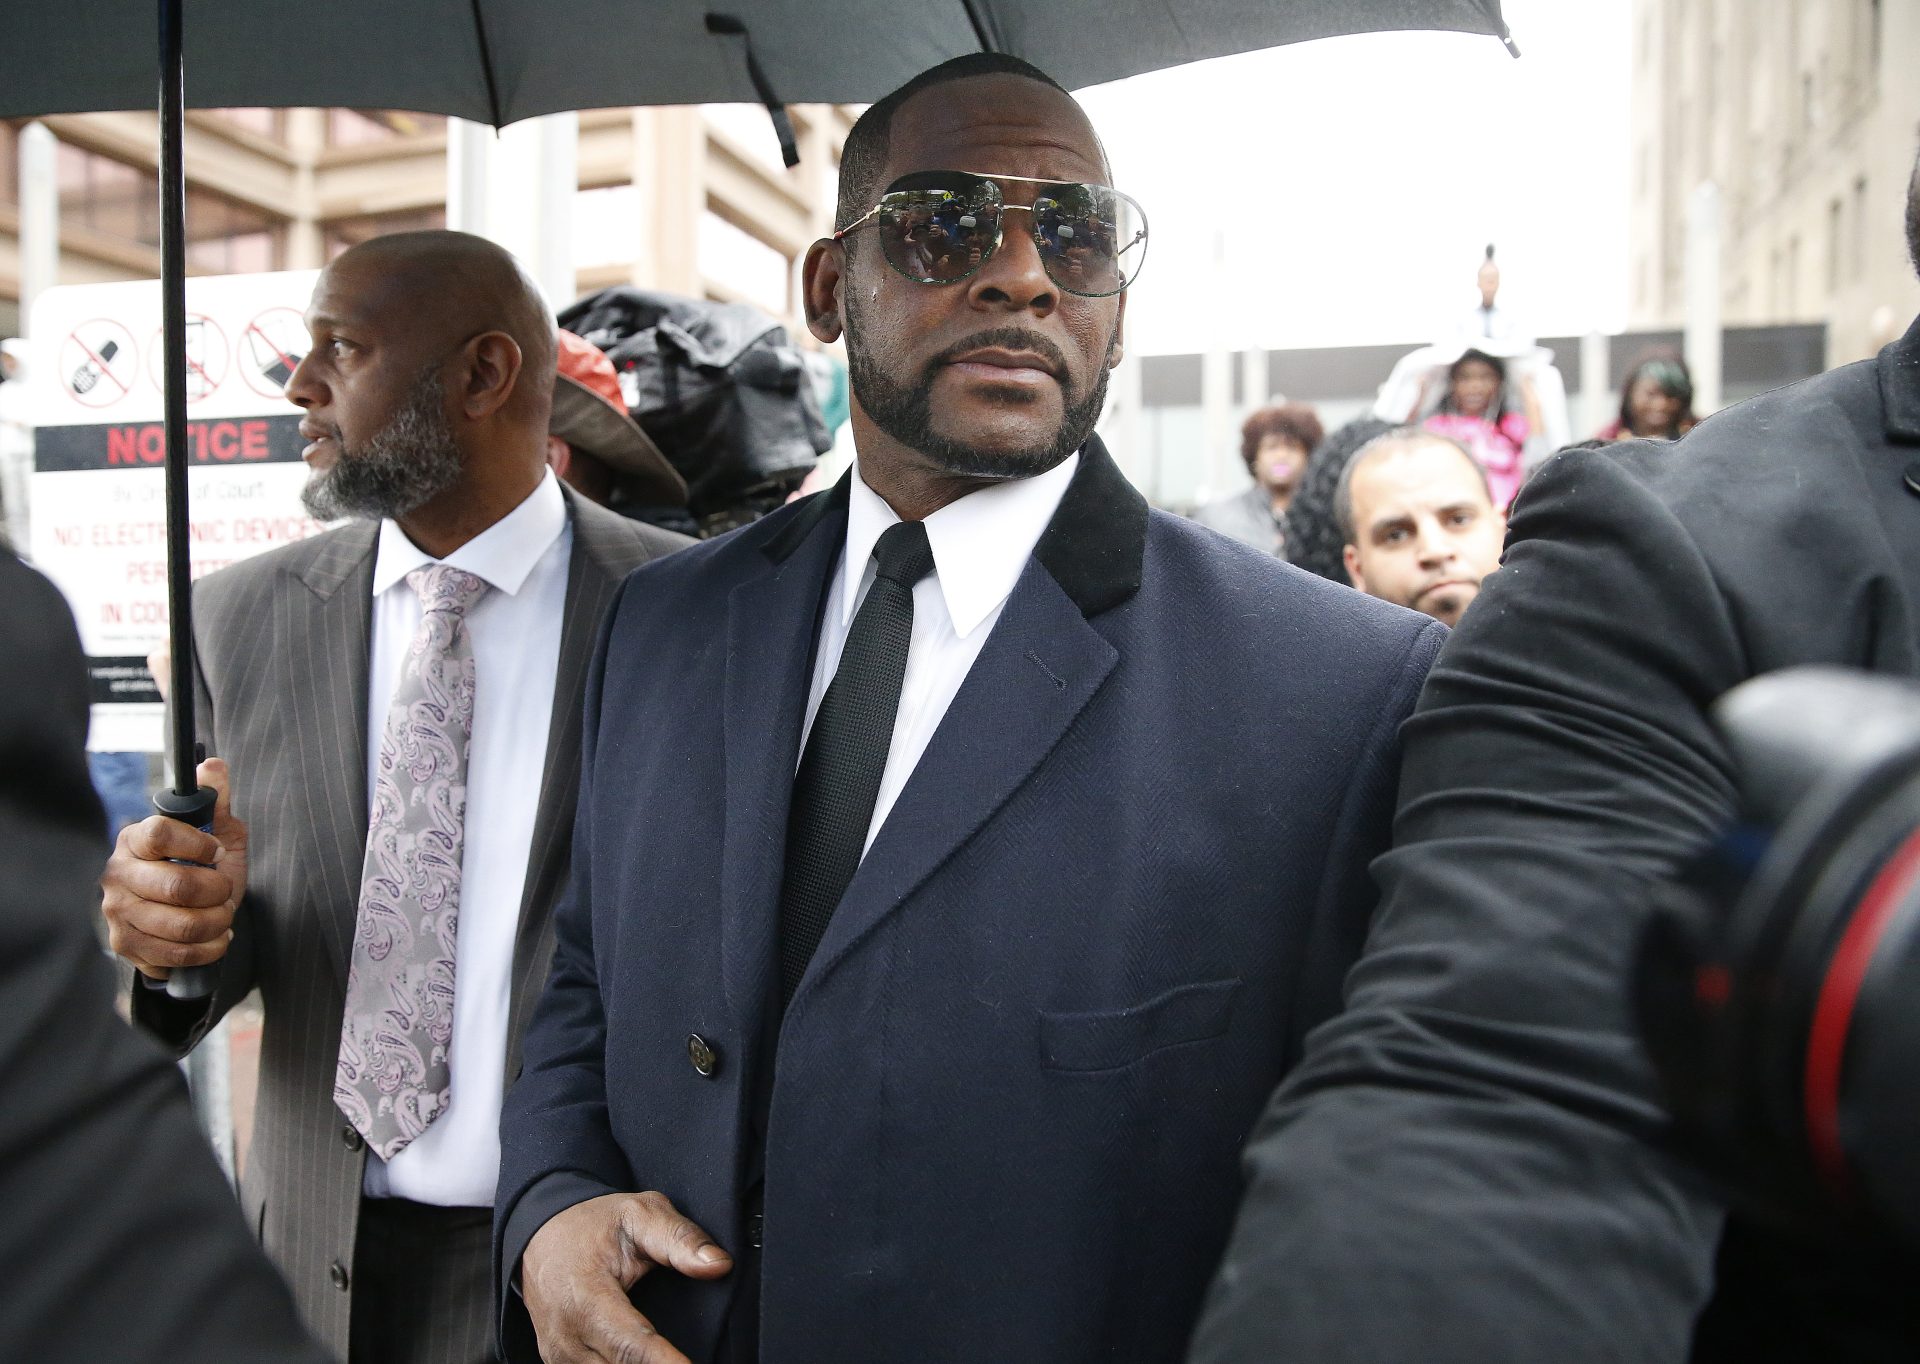 R. Kelly has been placed on suicide watch at the New York detention center he is being held after getting sentenced to 30 years in prison.